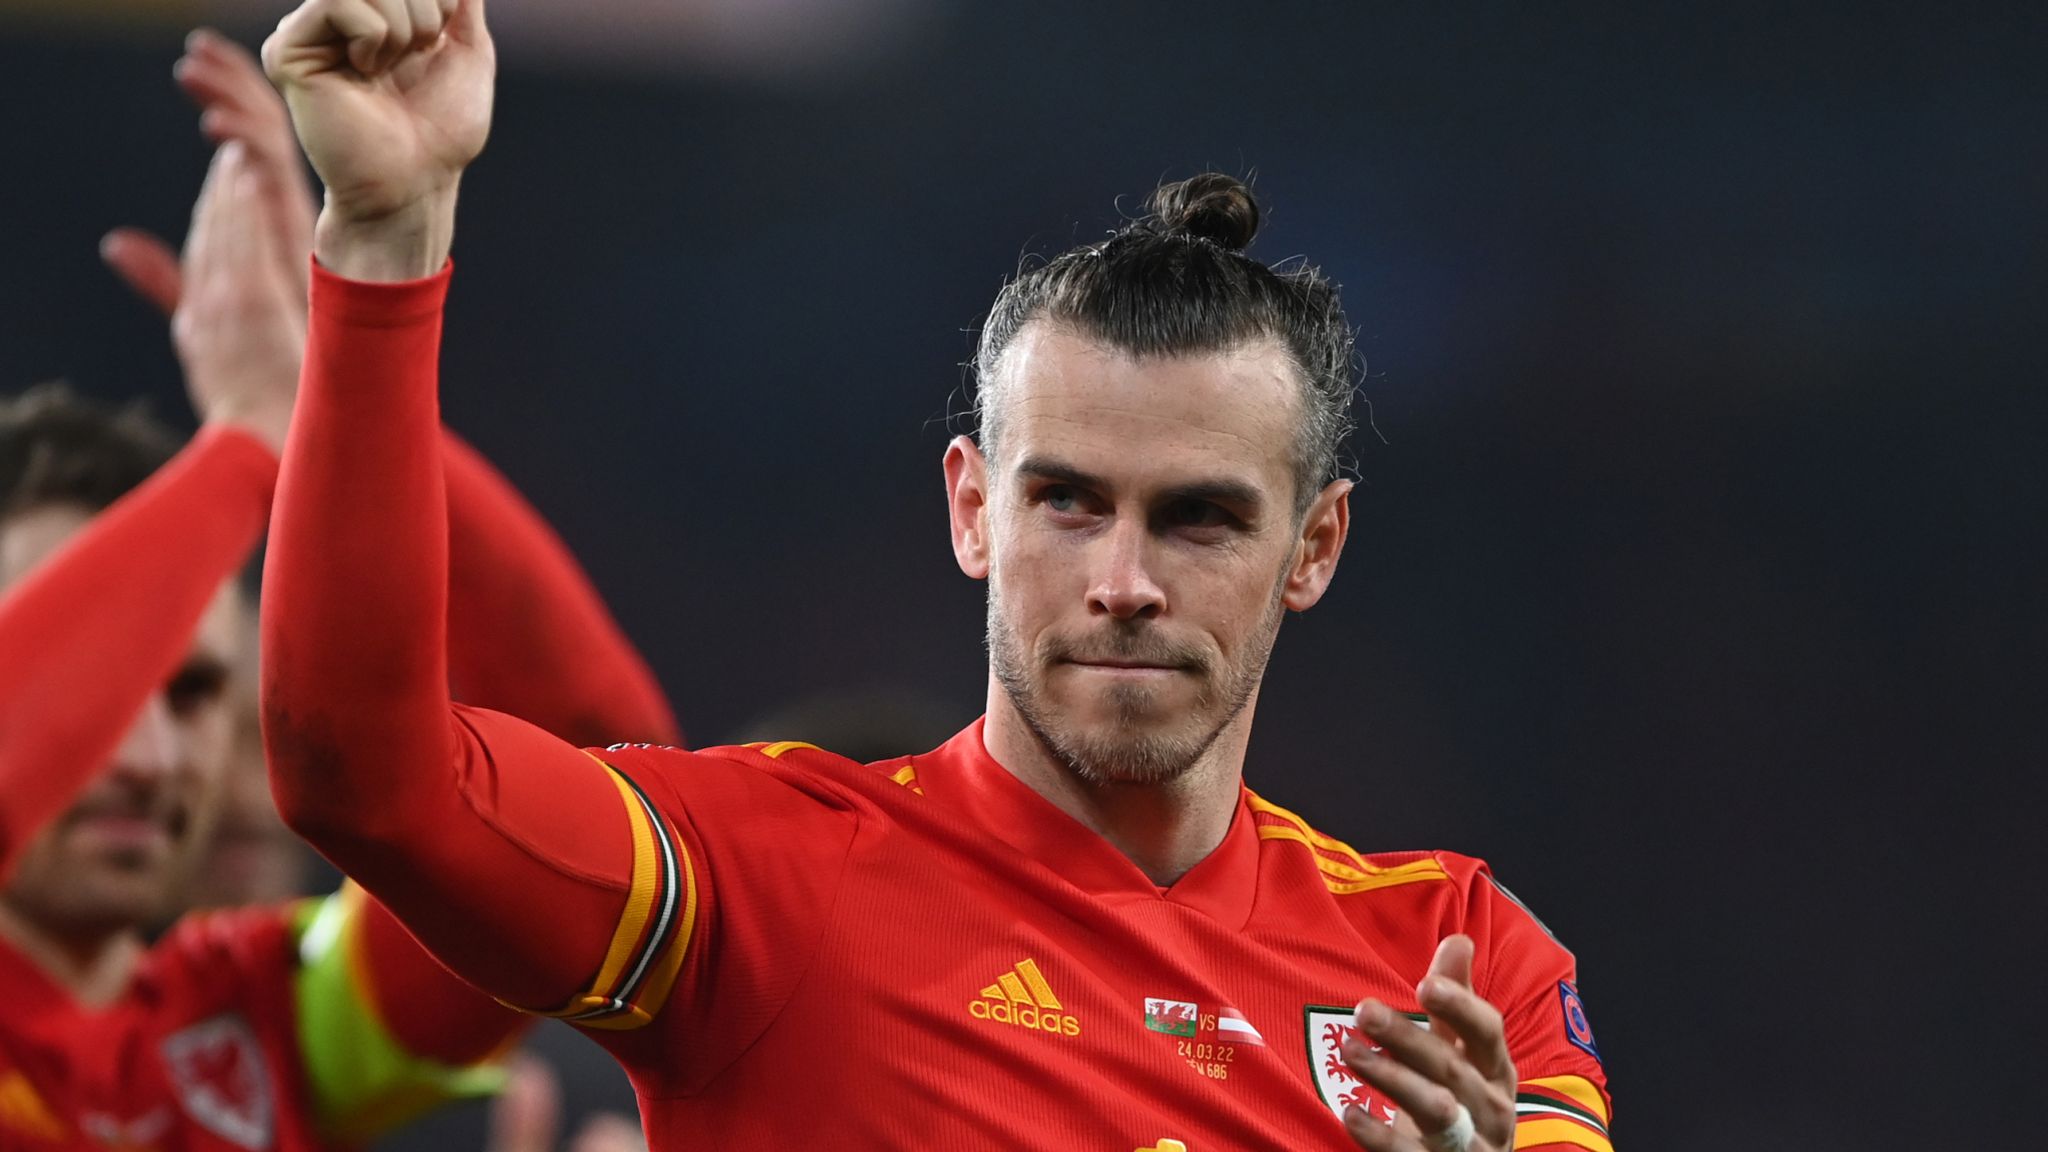 Wales Captain Gareth Bale to Retire From Football